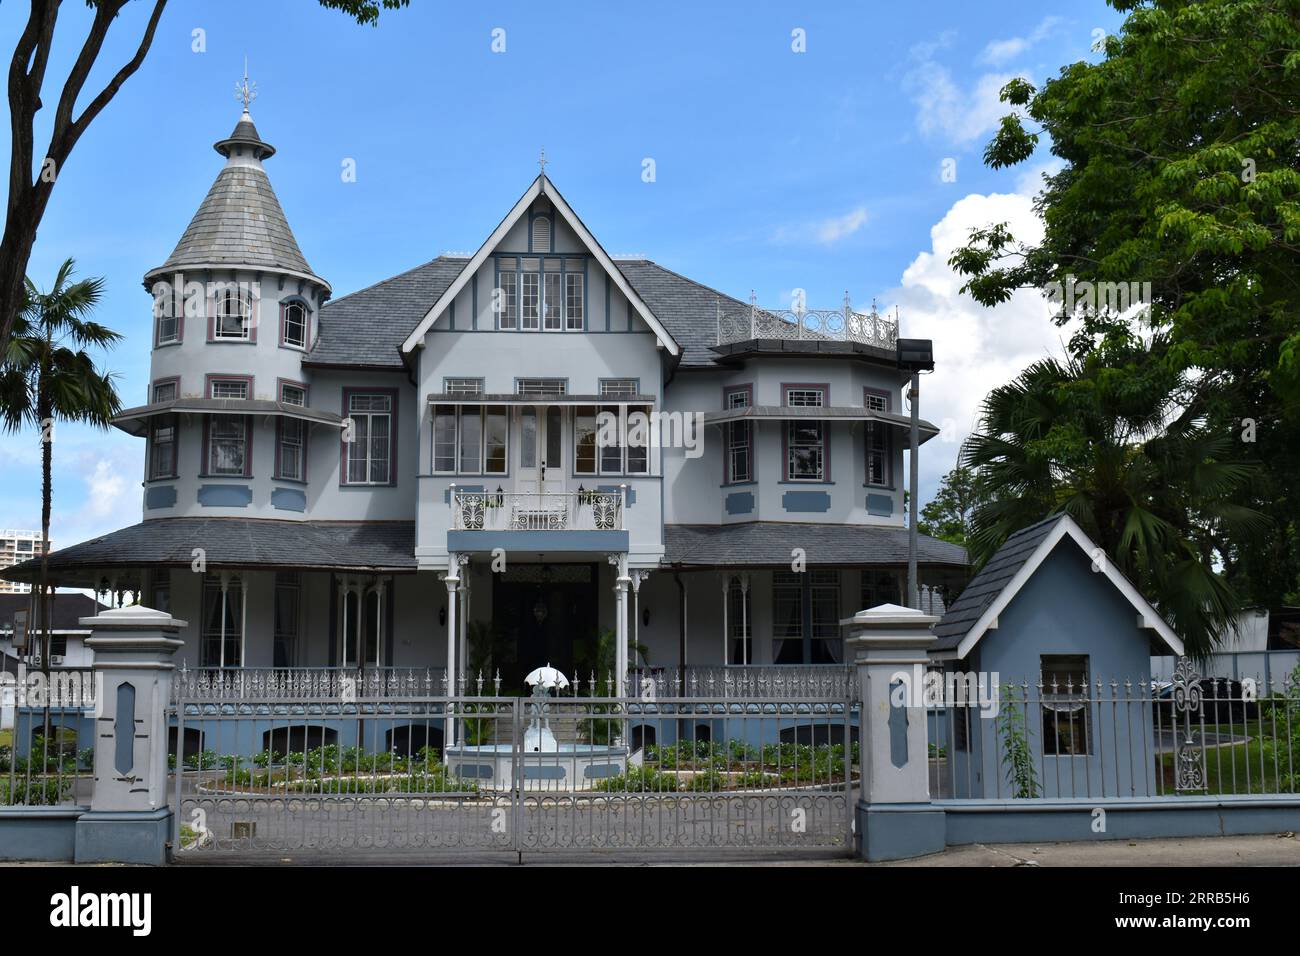 Mille Fleurs, one of the magnificent seven buildings in Port of Spain, Trinidad. The National Trust of Trinidad and Tobago is housed here. Stock Photo